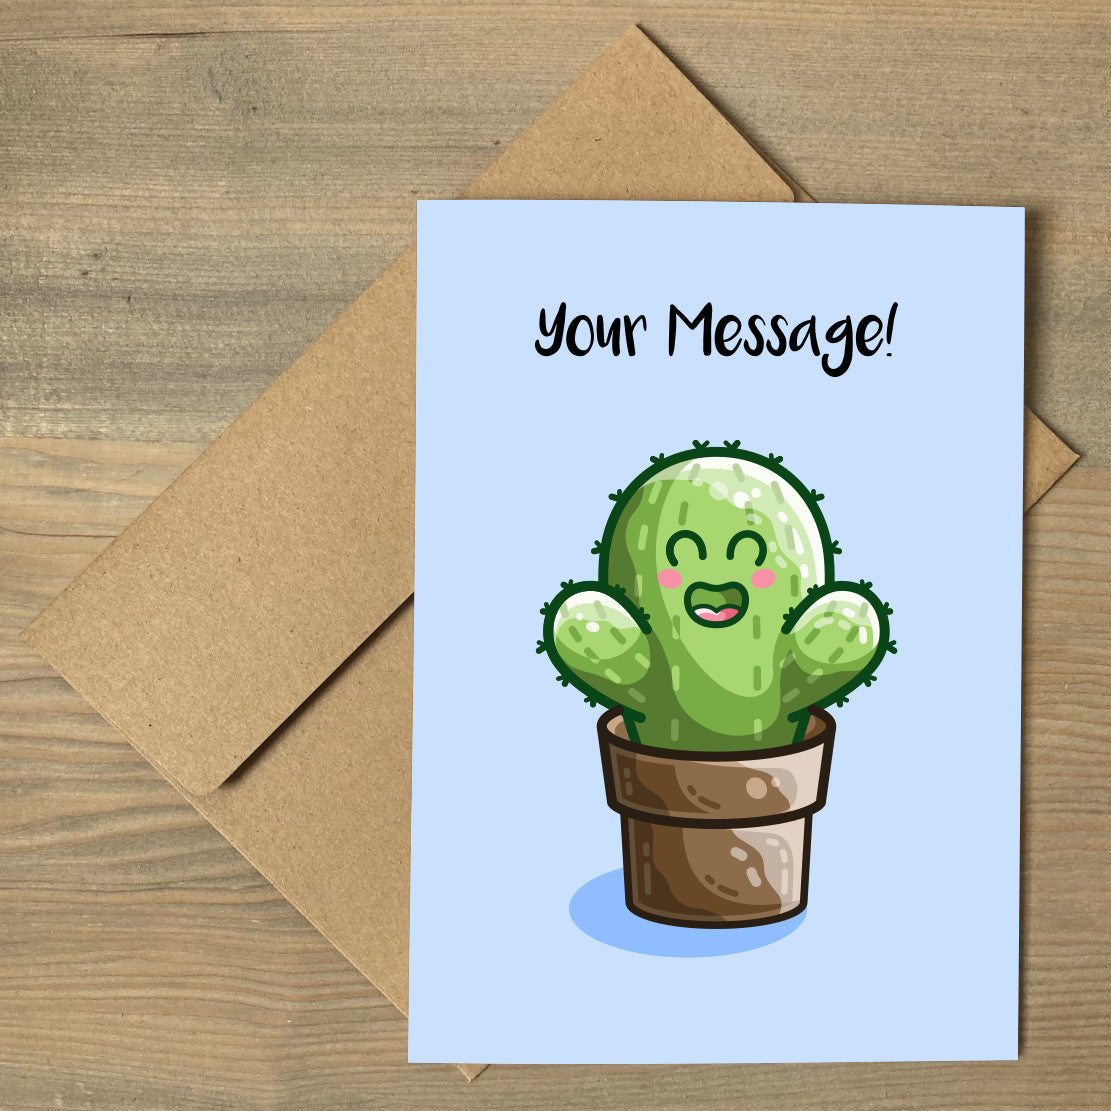 A brown envelope beneath a blue greeting card that features a kawaii cute green cactus in a brown plant pot with a personalised message above.